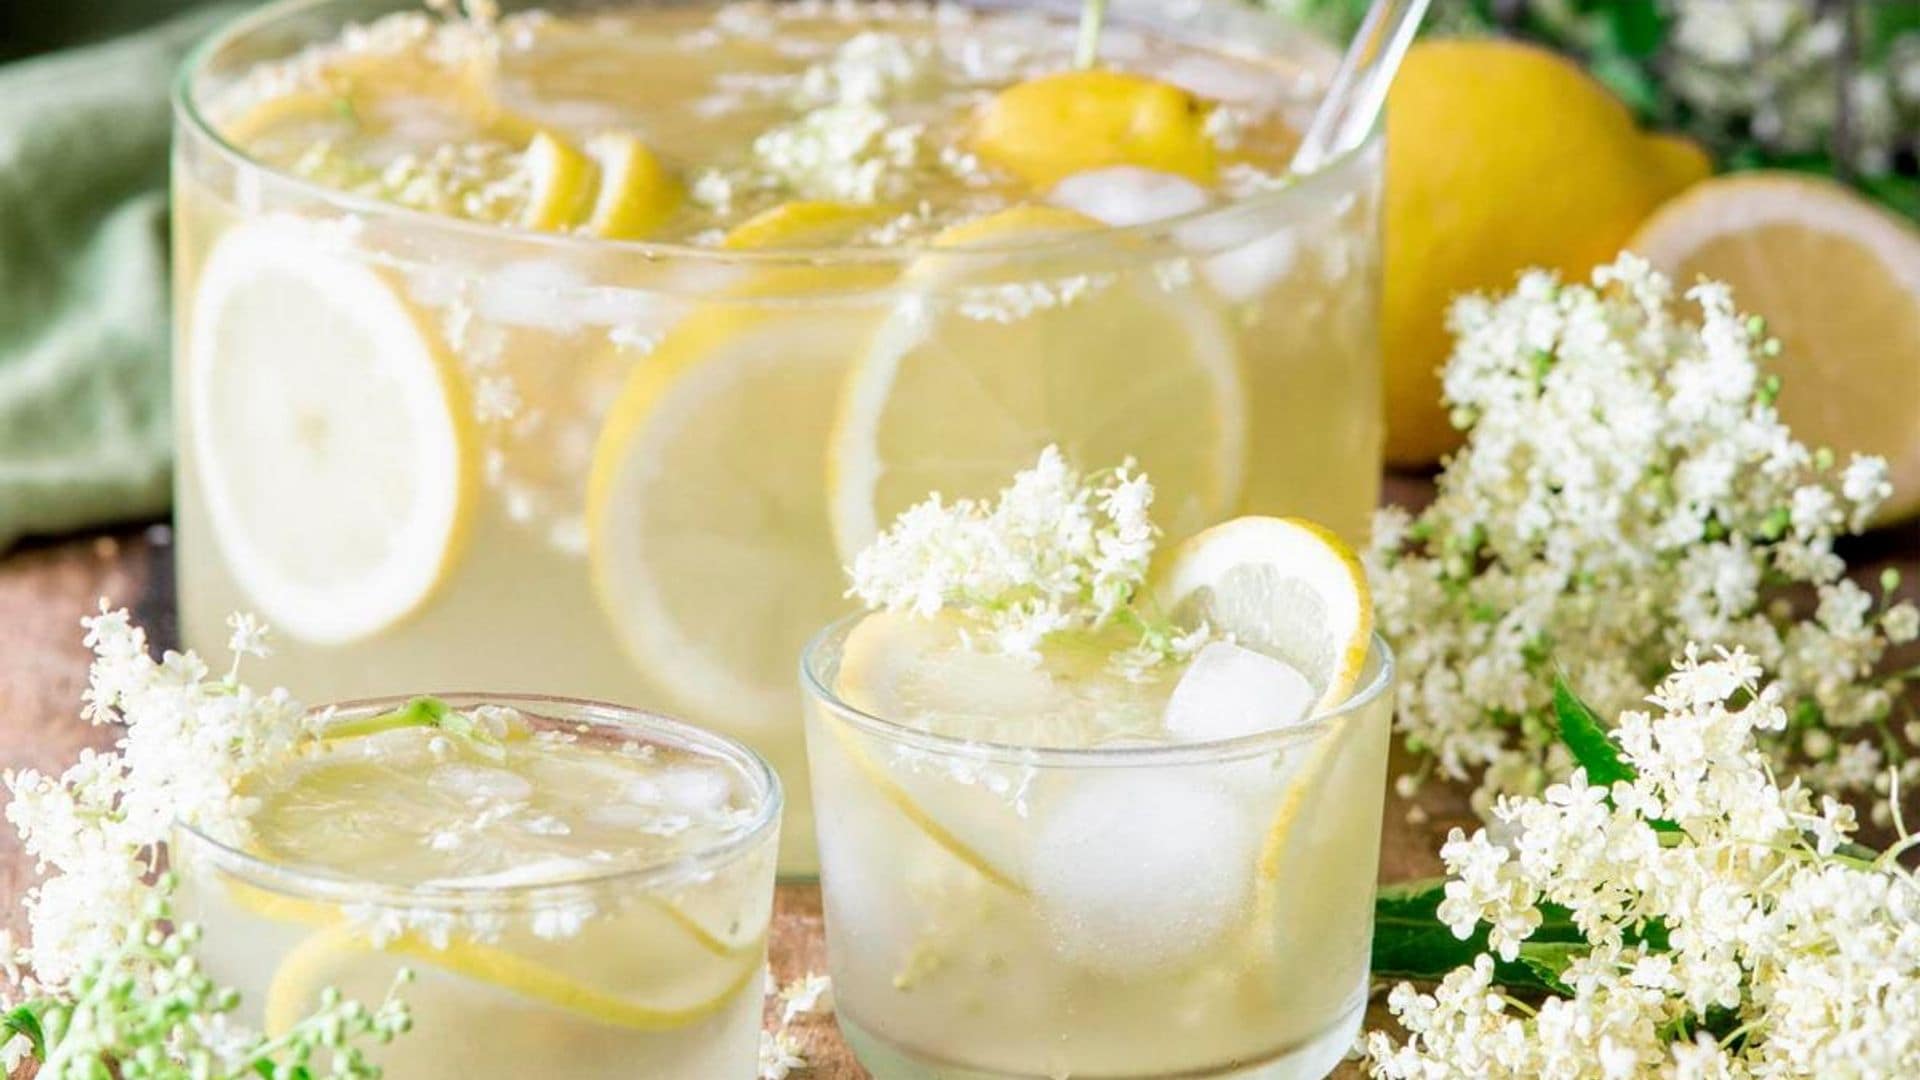 Lemon juice: All the health benefits you need to know about